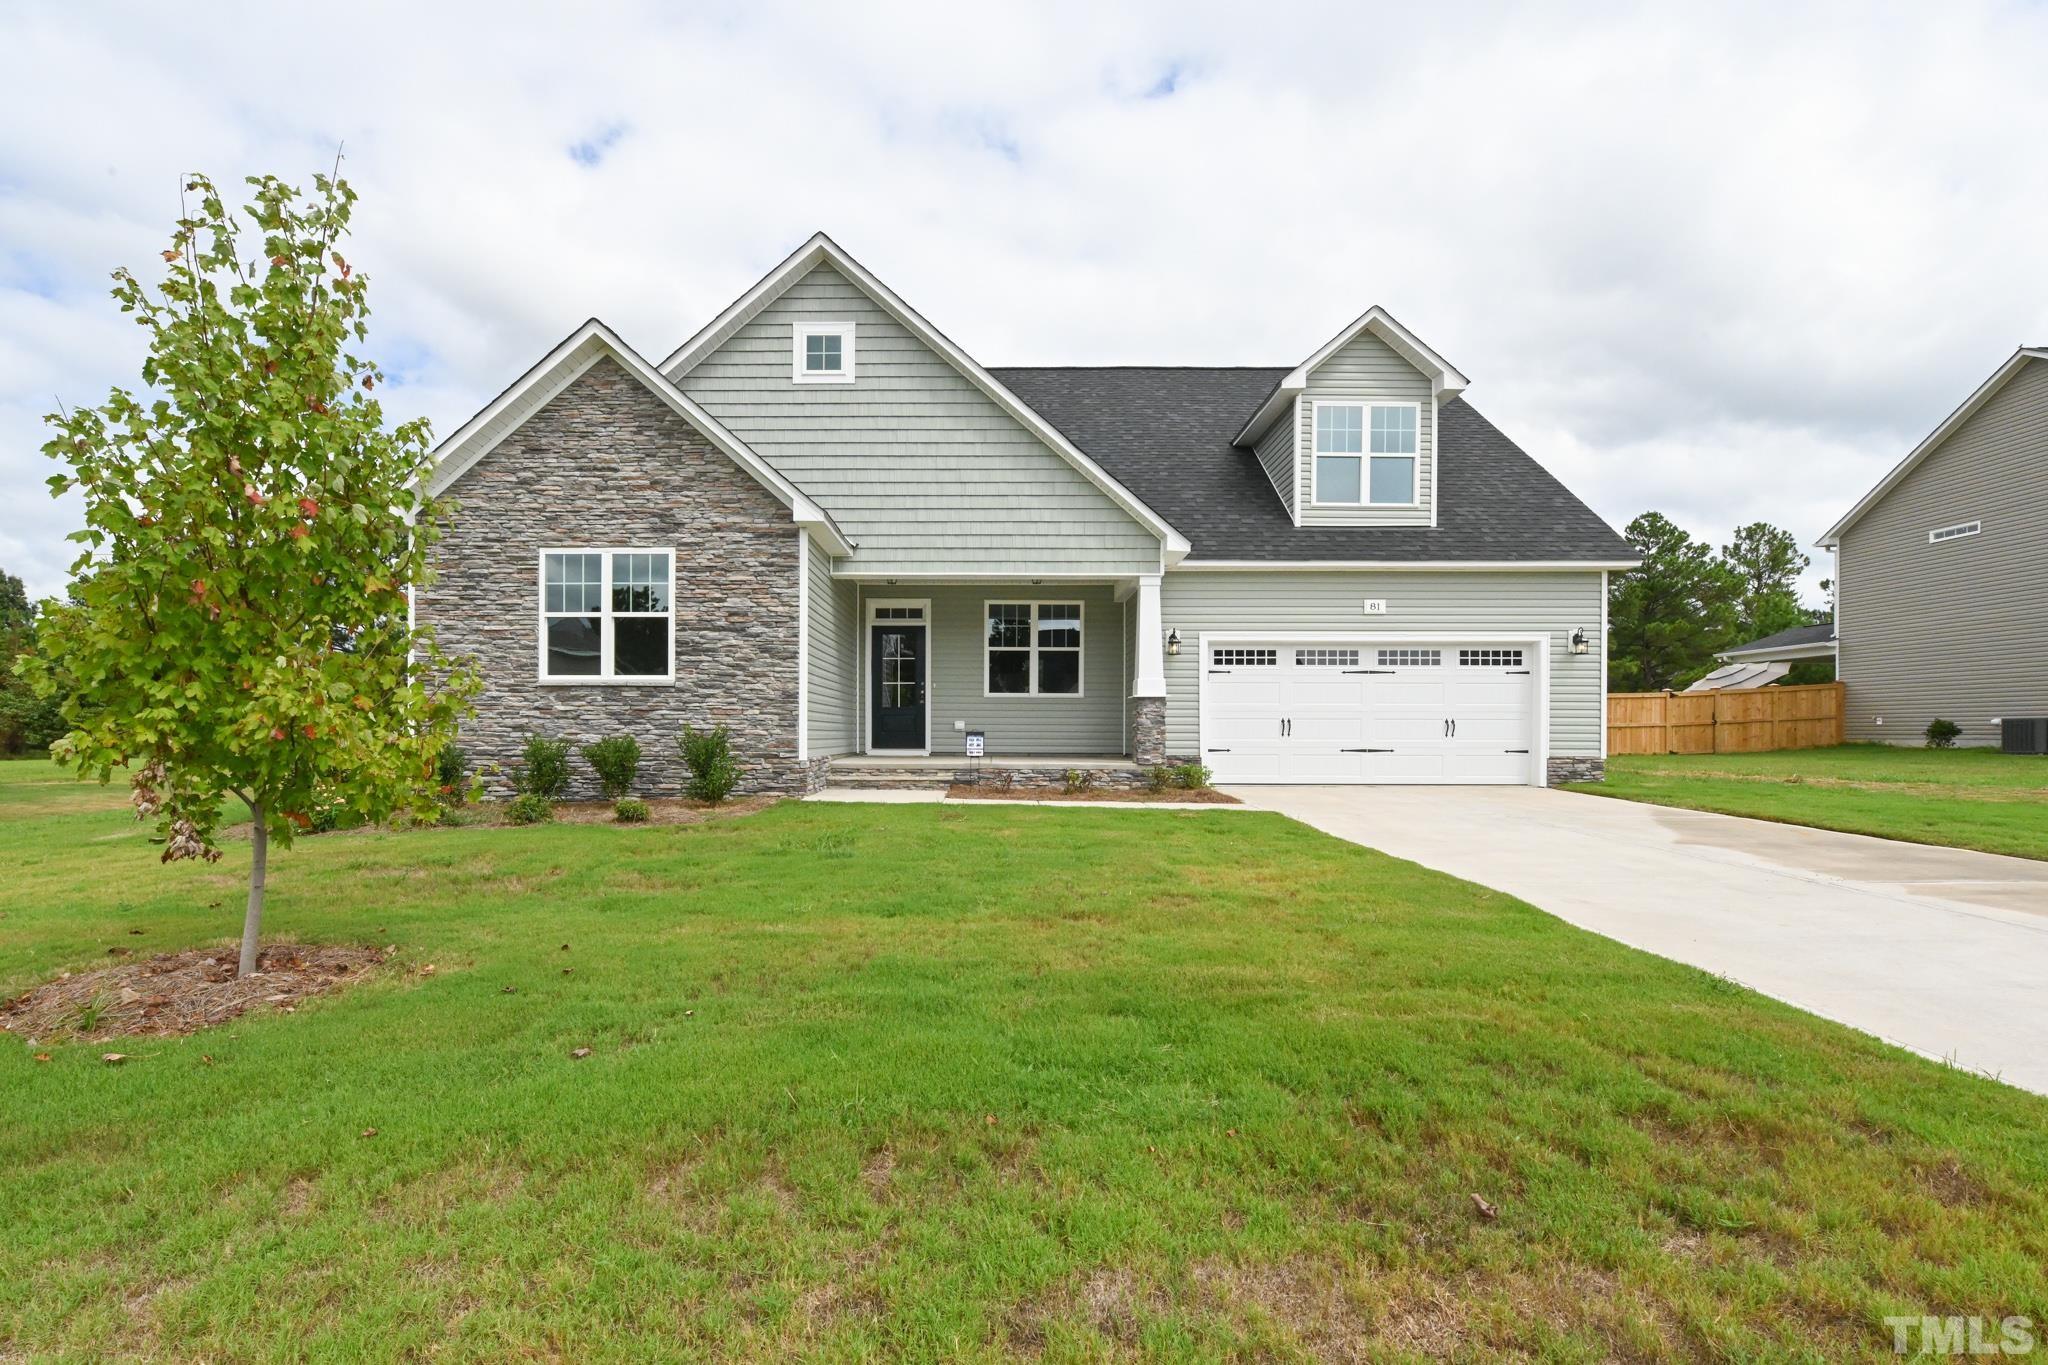 New home for sale in Oak Hill Farms, Clayton NC